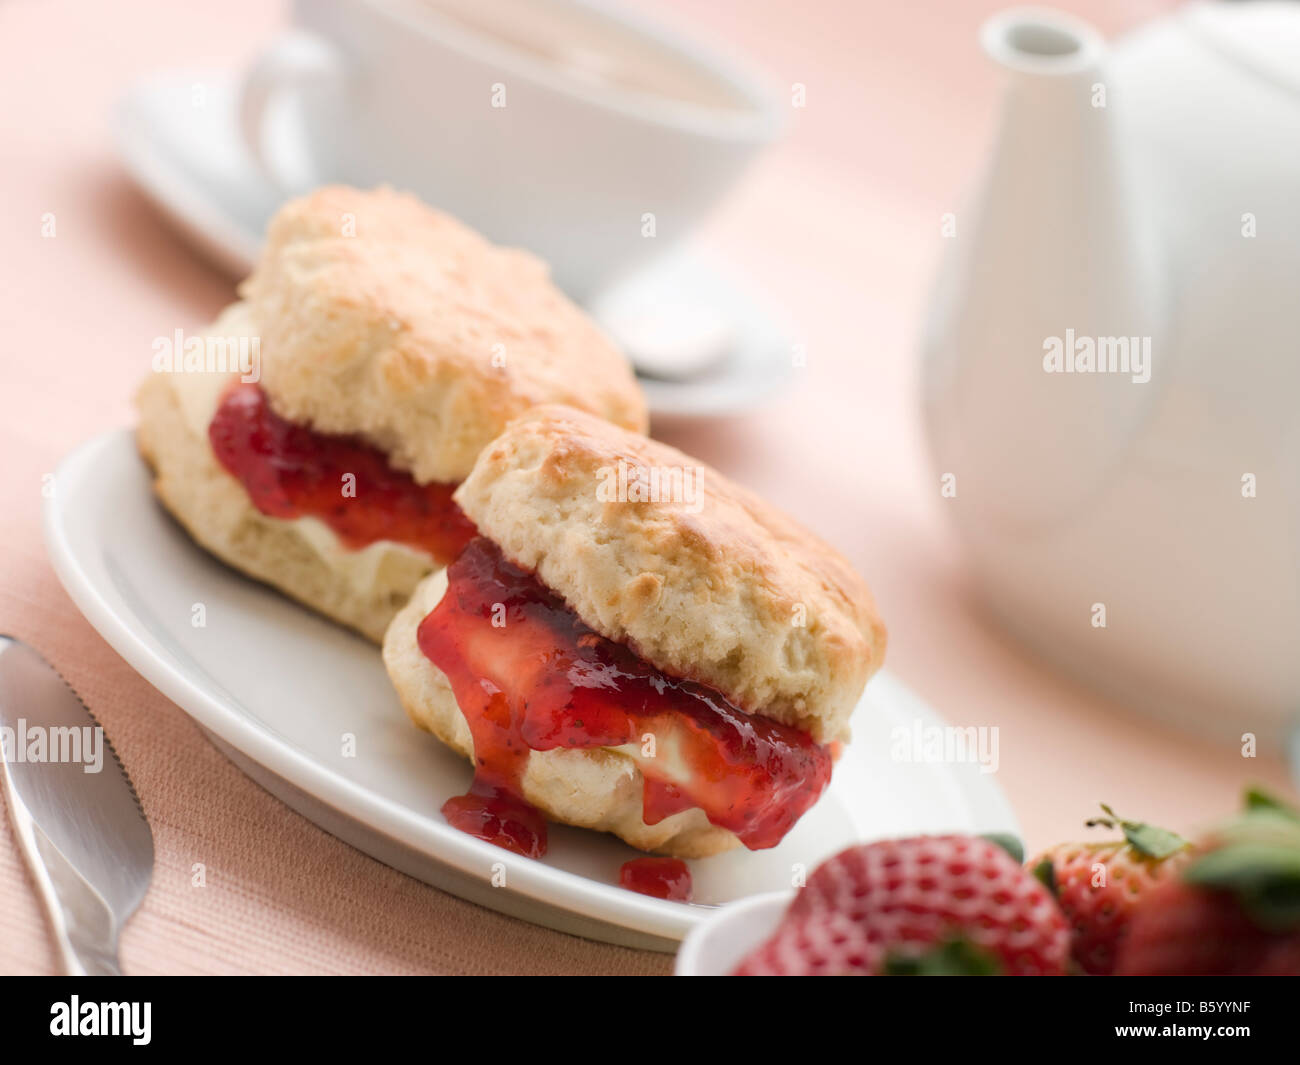 Scones Jam Clotted Cream and Strawberries with Afternoon Tea Stock Photo